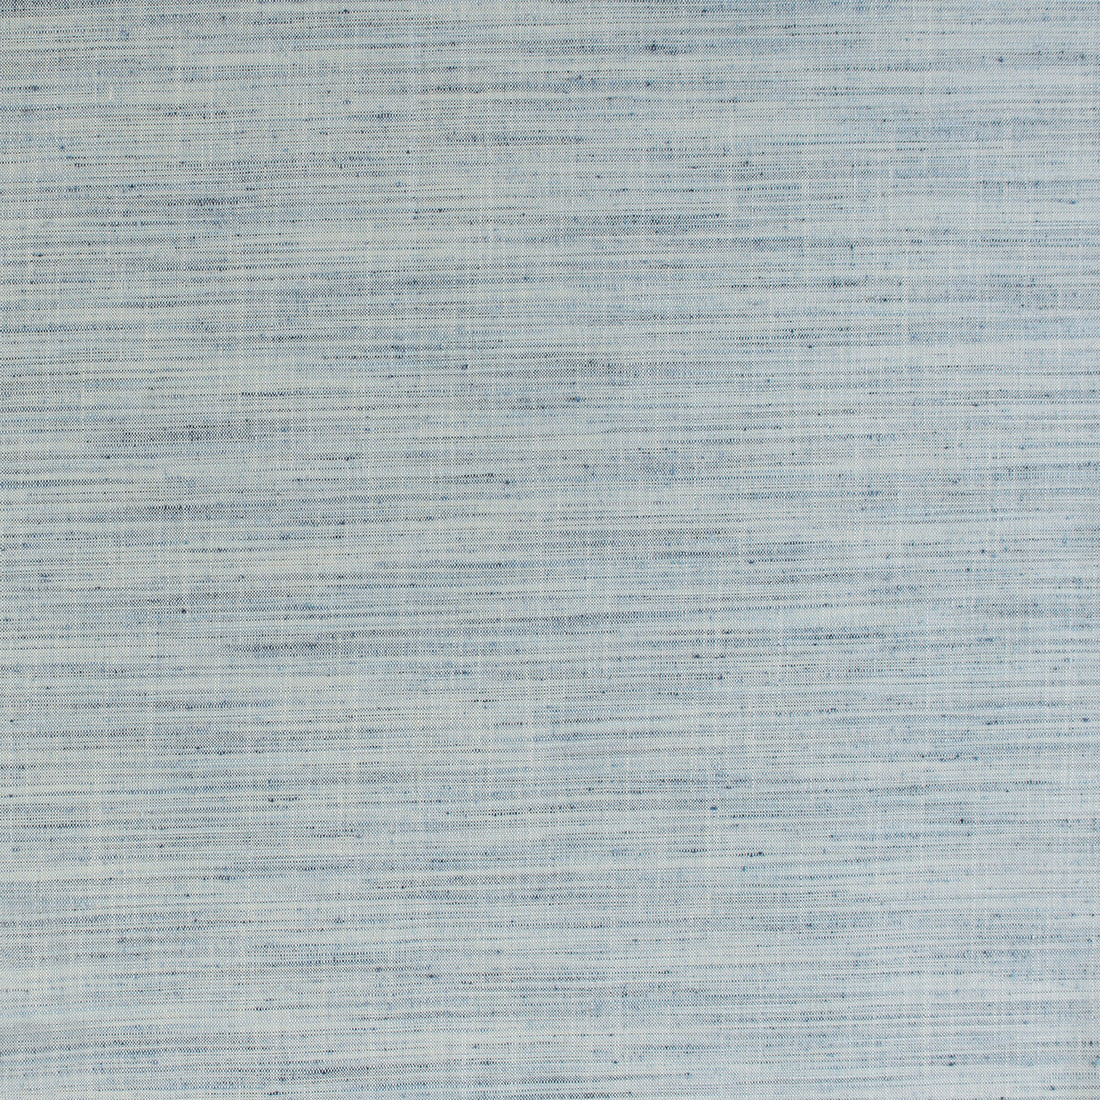 Groundcover fabric in chambray color - pattern 35911.15.0 - by Kravet Design in the Barbara Barry Home Midsummer collection